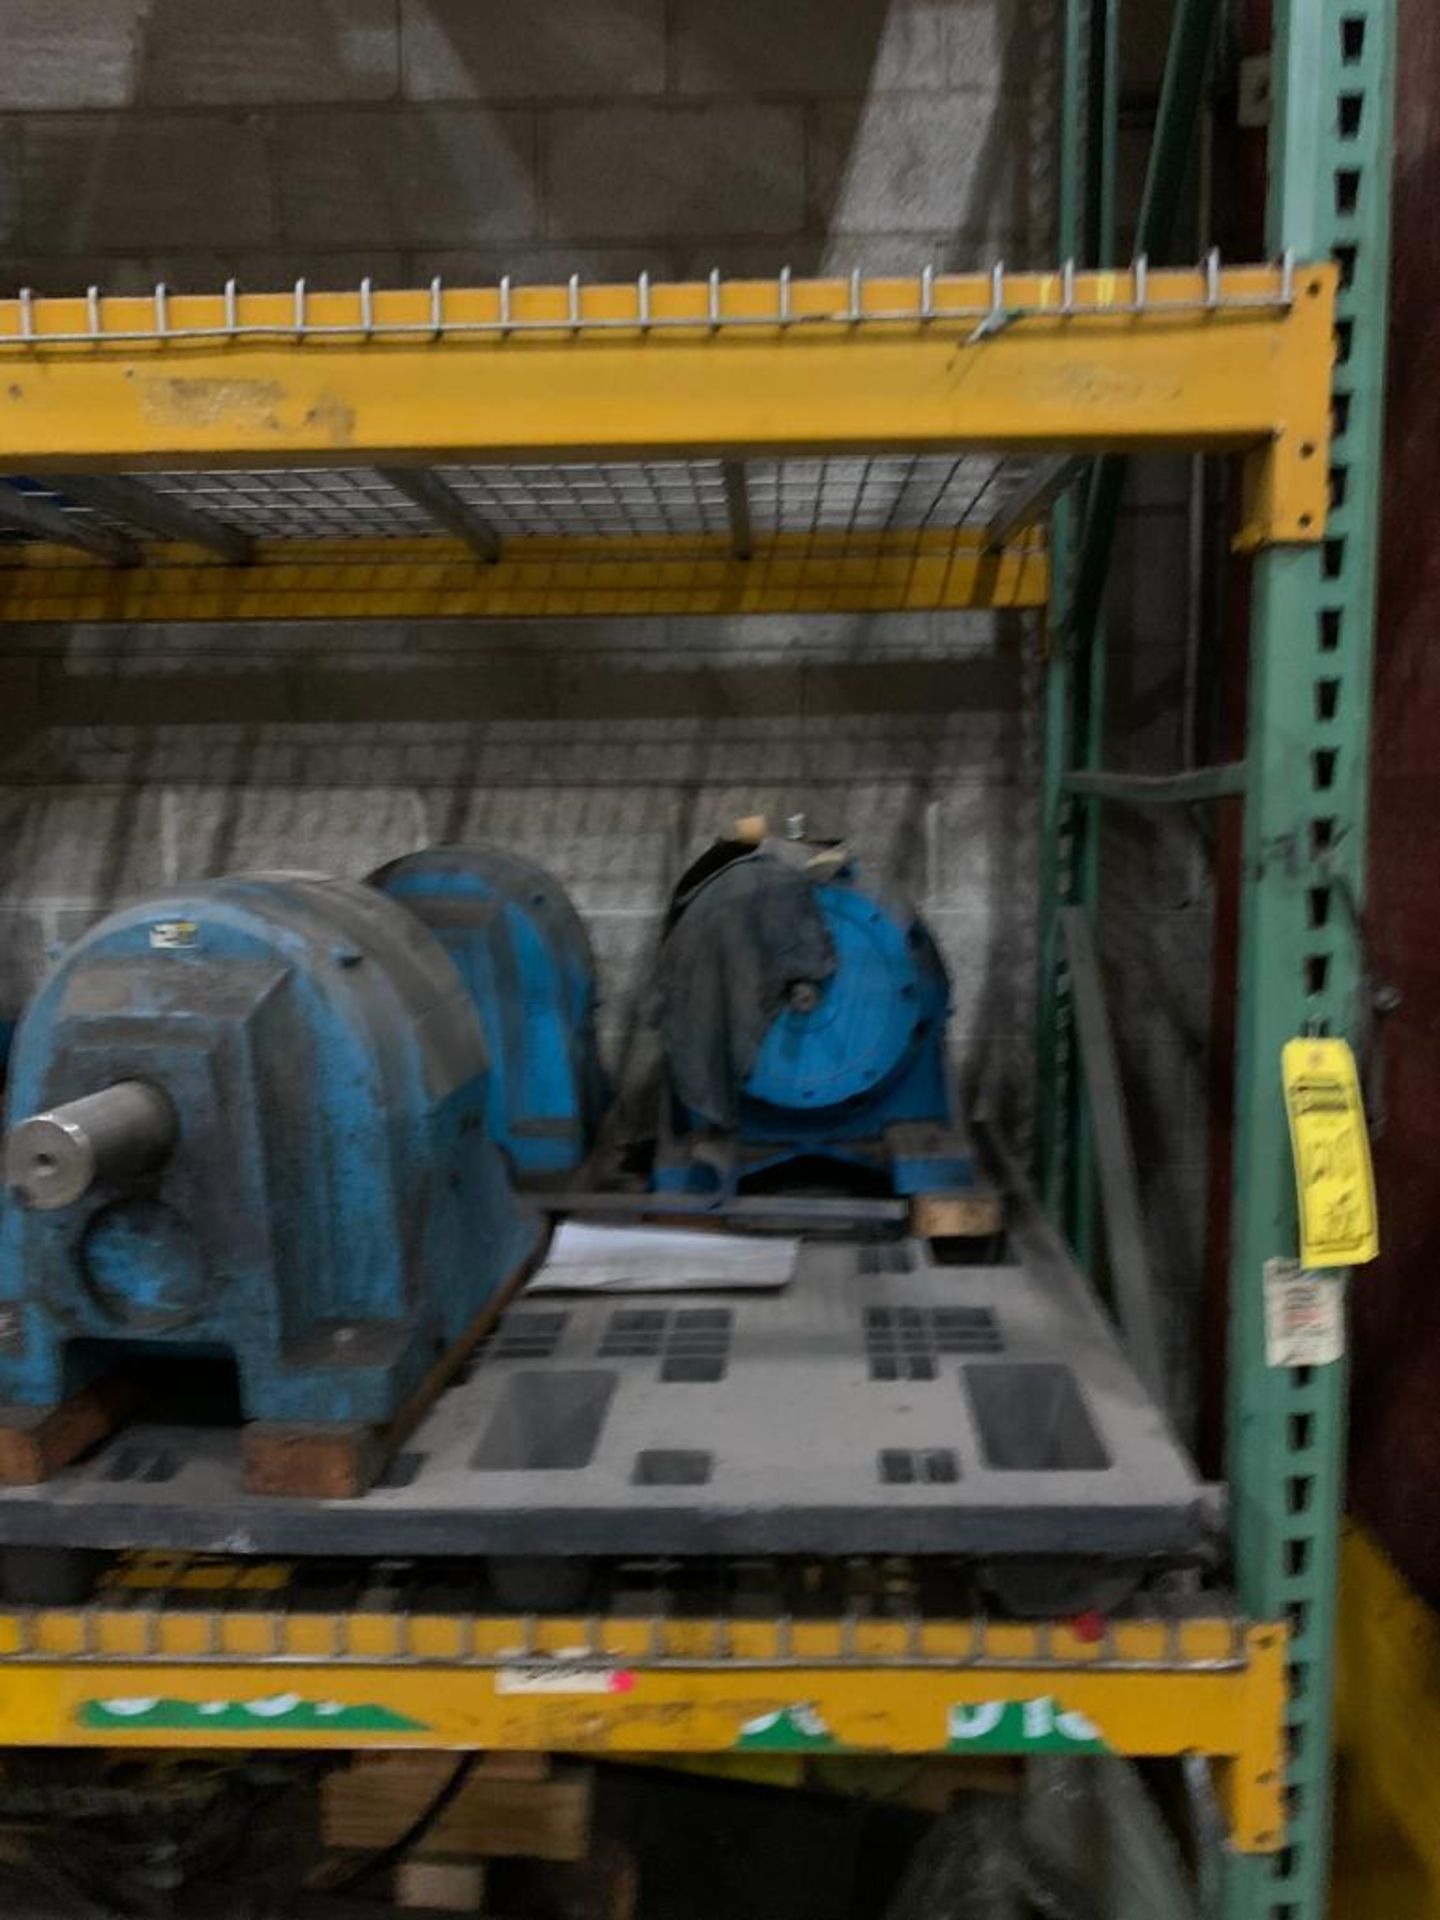 Contents of (3) Sections of Pallet Racking Including Gear Boxes, Gears, Color Roll Cylinders, Auramo - Image 14 of 34